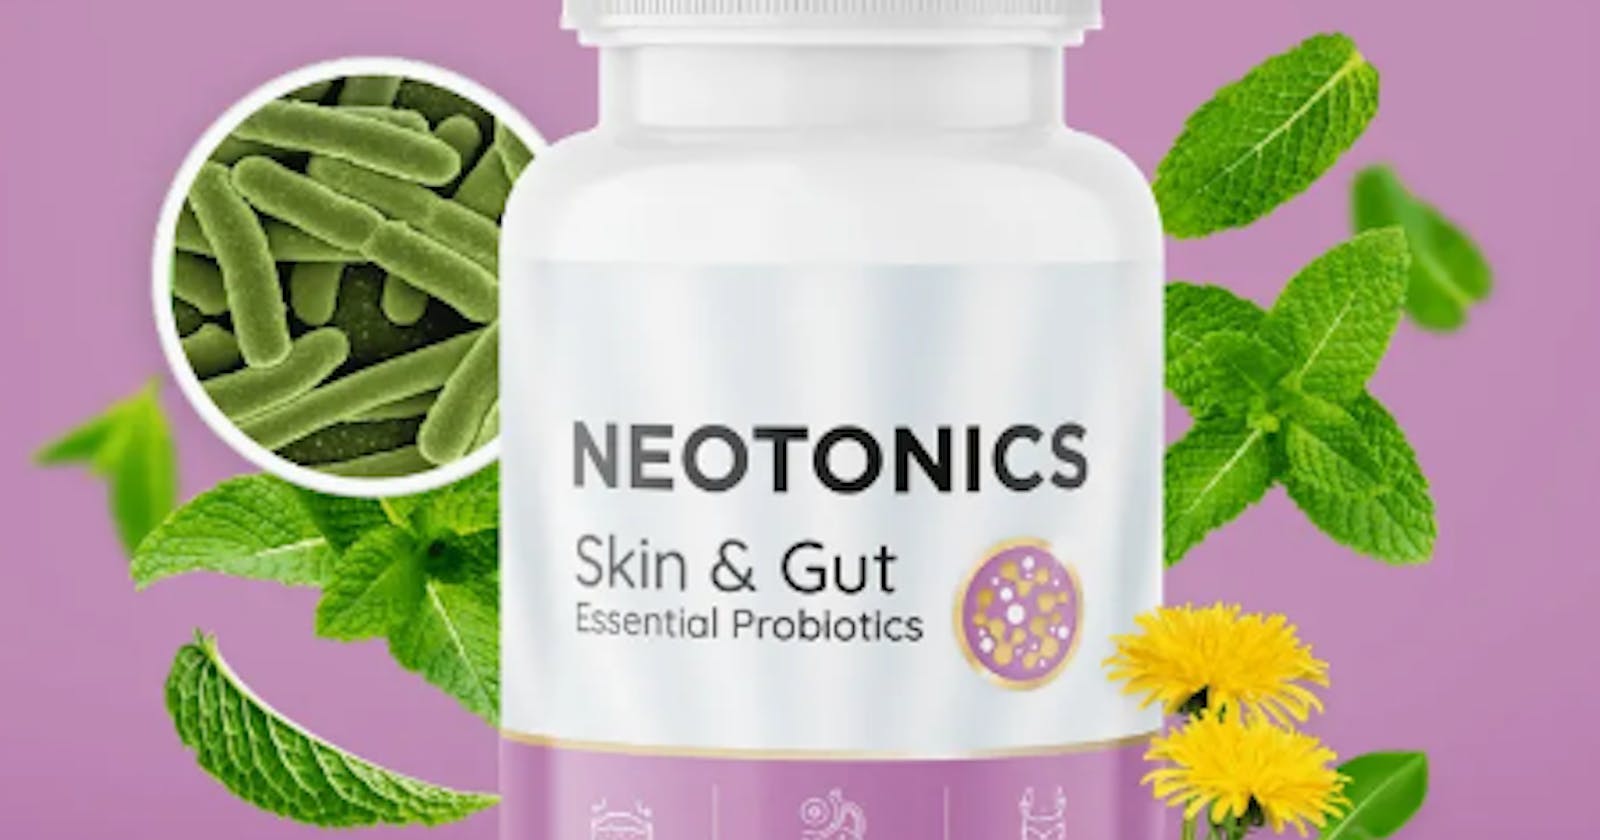 5 Reasons Why NeoTonics is Essential for Skin and Gut Health